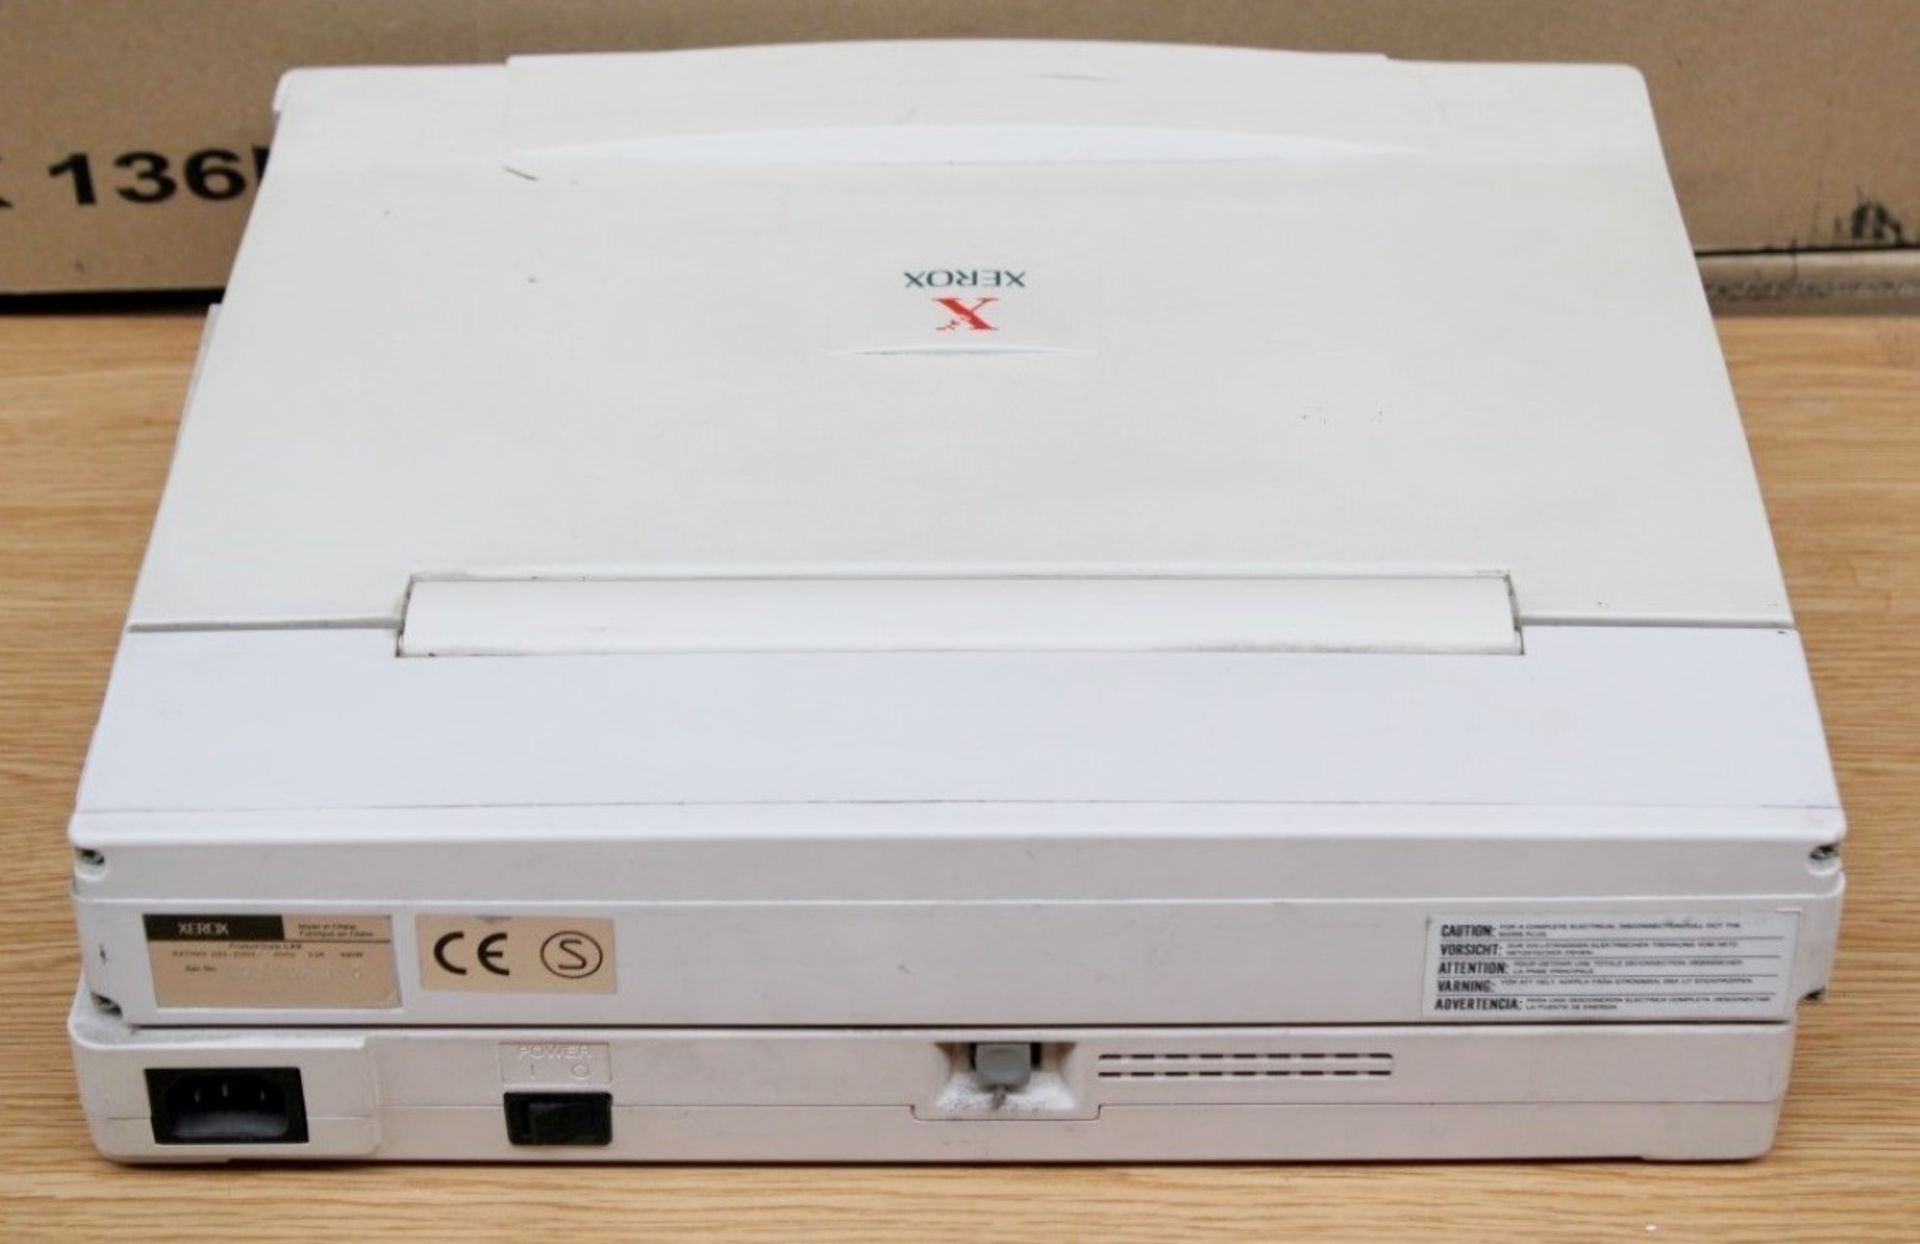 1 x Xeros XC351 Office Scanner – Preowned / Untested, No Leads Included - Ref: AL104 - CL107 – - Image 3 of 5